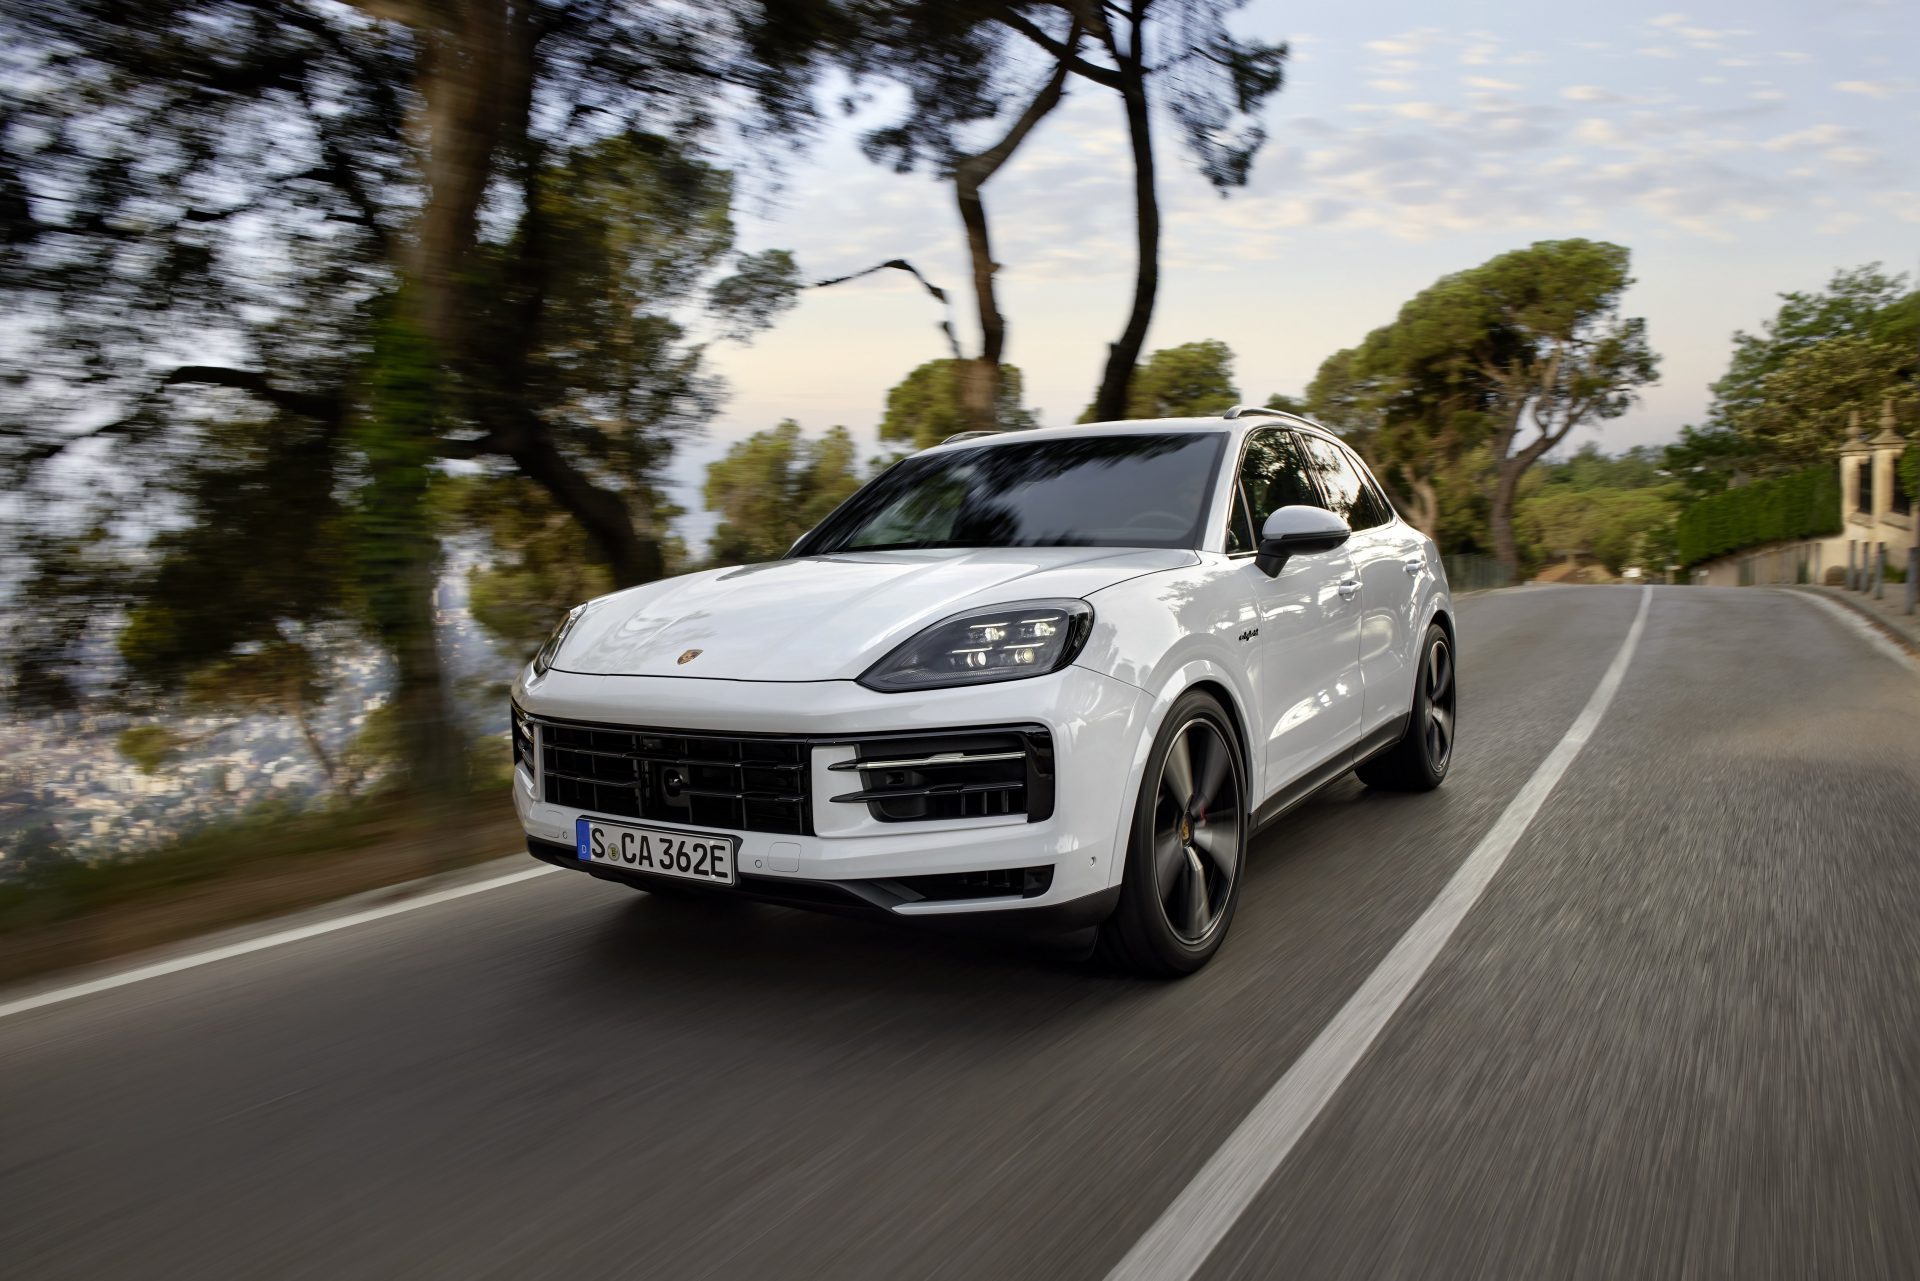 New Porsche Driver Experience makes its debut in the Cayenne